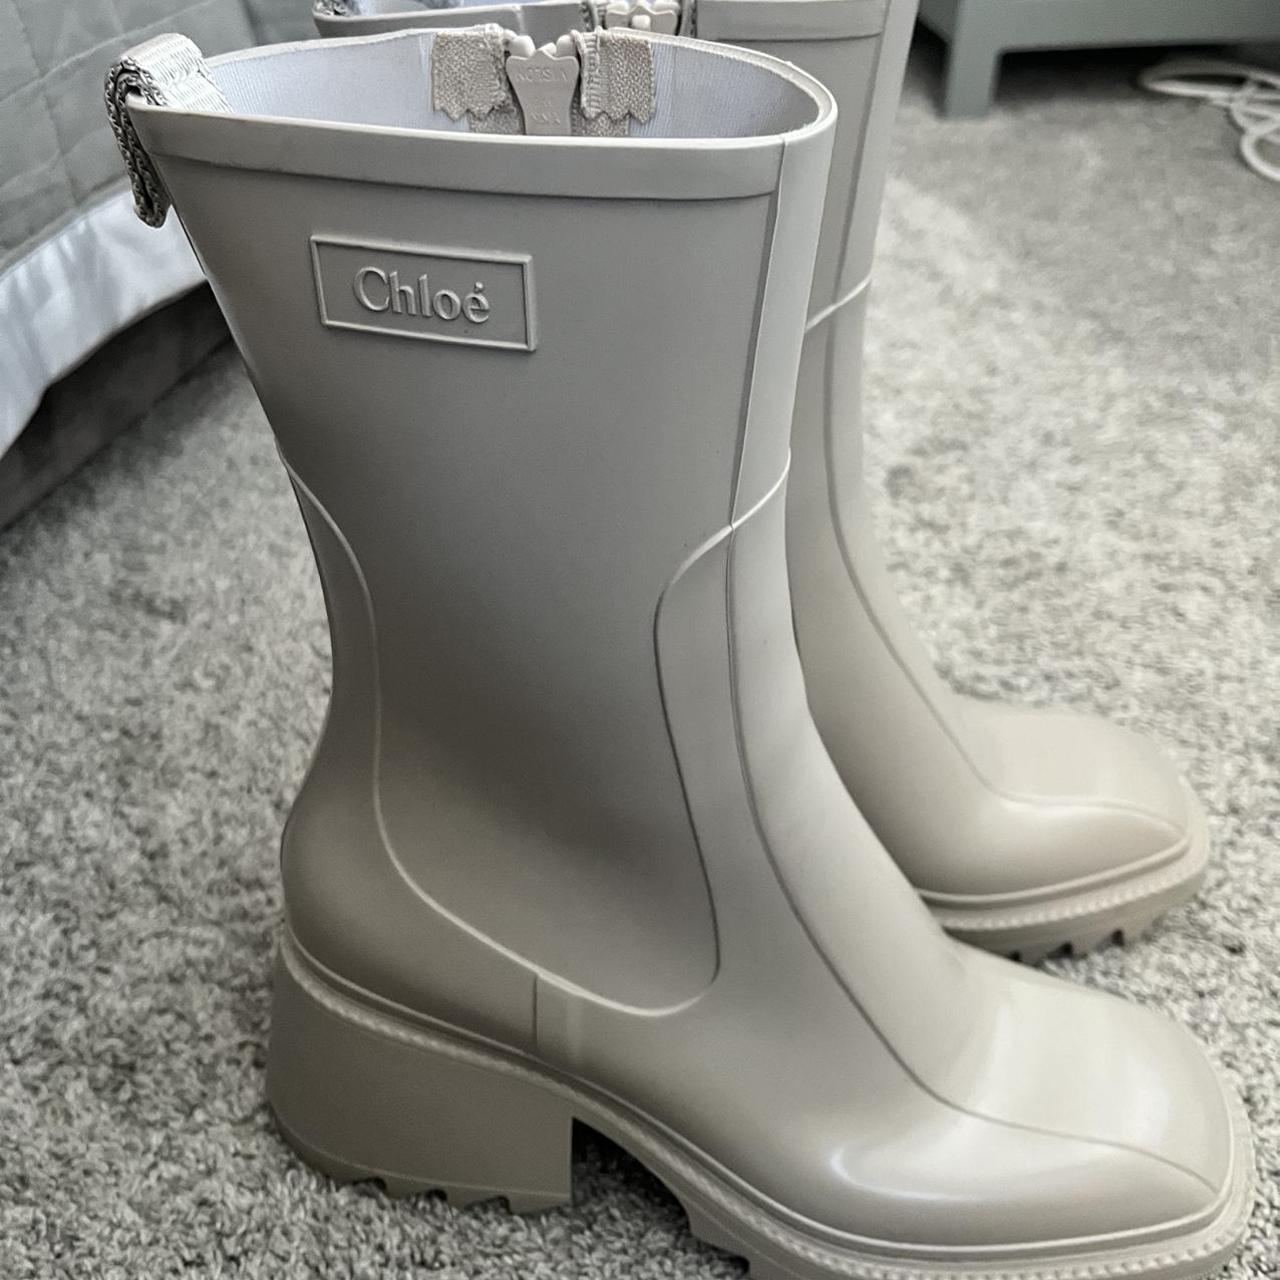 CHLOE BETTY PVC ANKLE BOOTS. Worn a couple of... - Depop